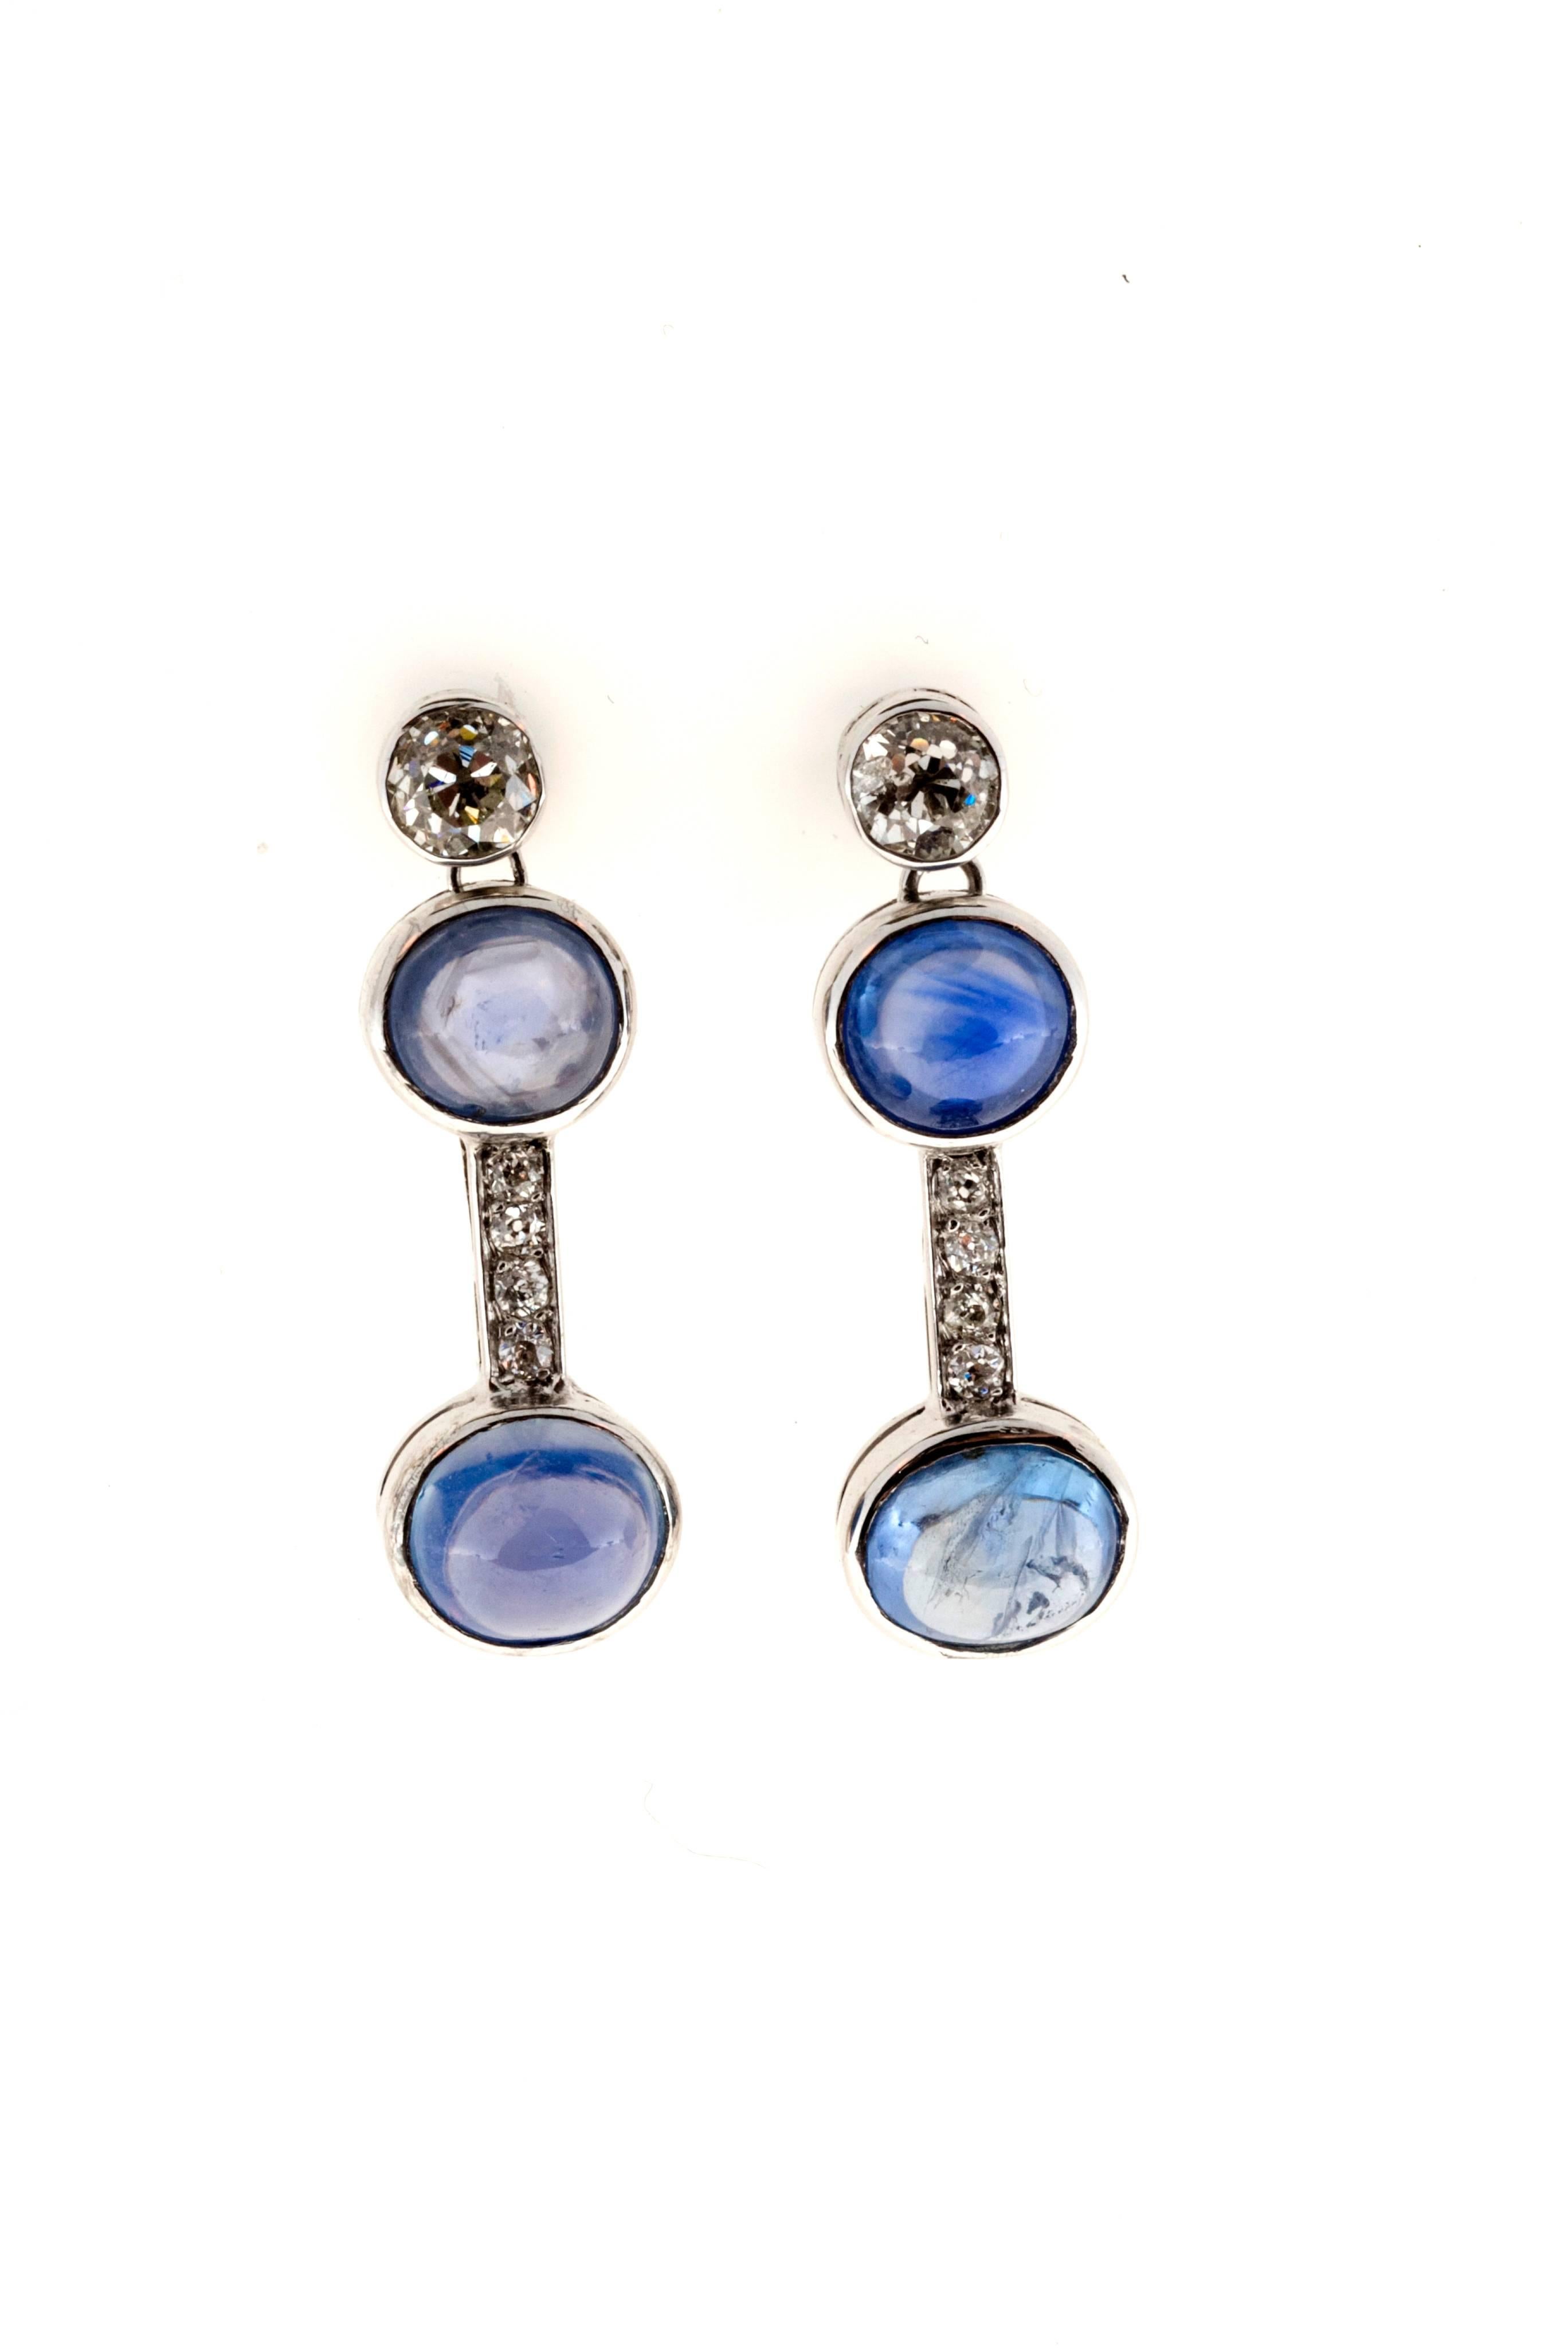 Platinum dangle earrings with old mine cut diamonds on top and Ceylon Sapphire cabochons with a diamond bar in-between
4 natural light to medium blue cabochon genuine Sapphires.

2 old mine cut diamonds, approx. total weight.70cts, G - H, VS2 -